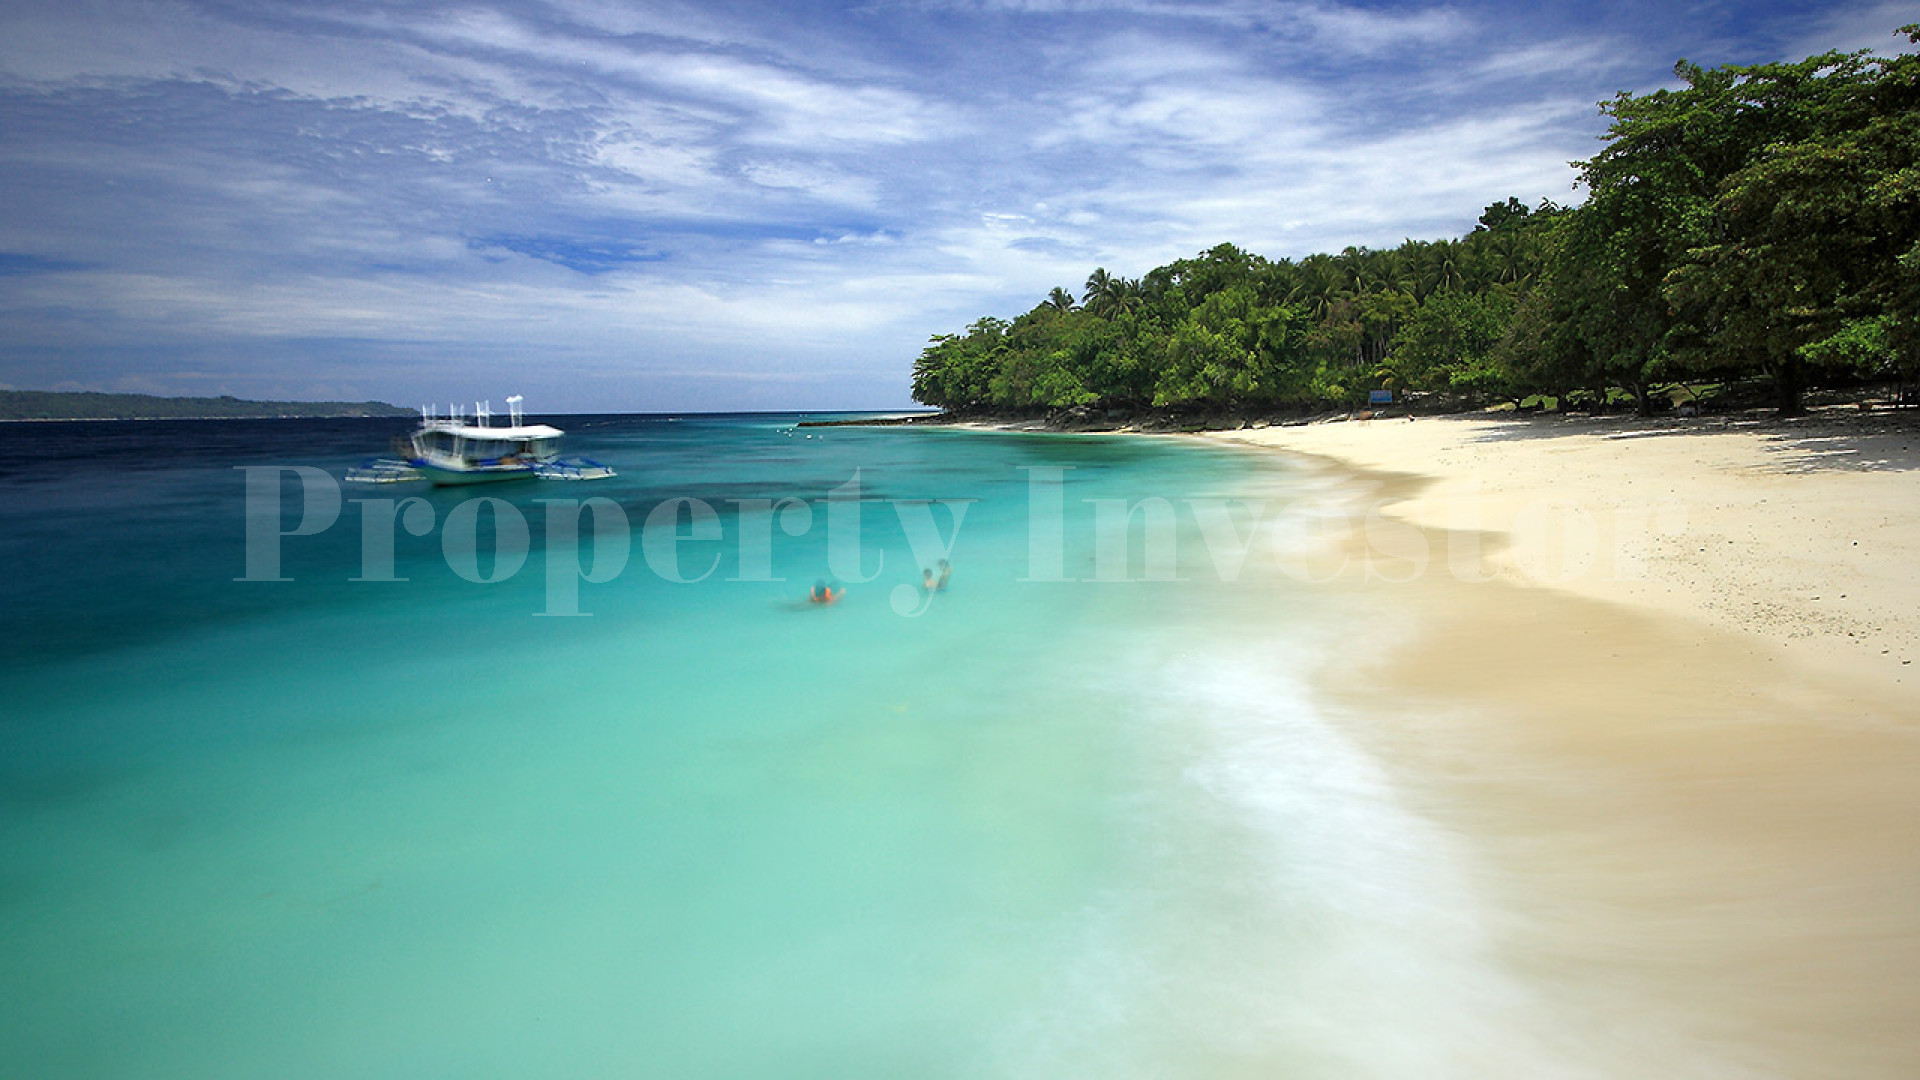 Picturesque 34 Hectare Private Island for Residential or Commercial Development for Sale Near Palawan, Philippines